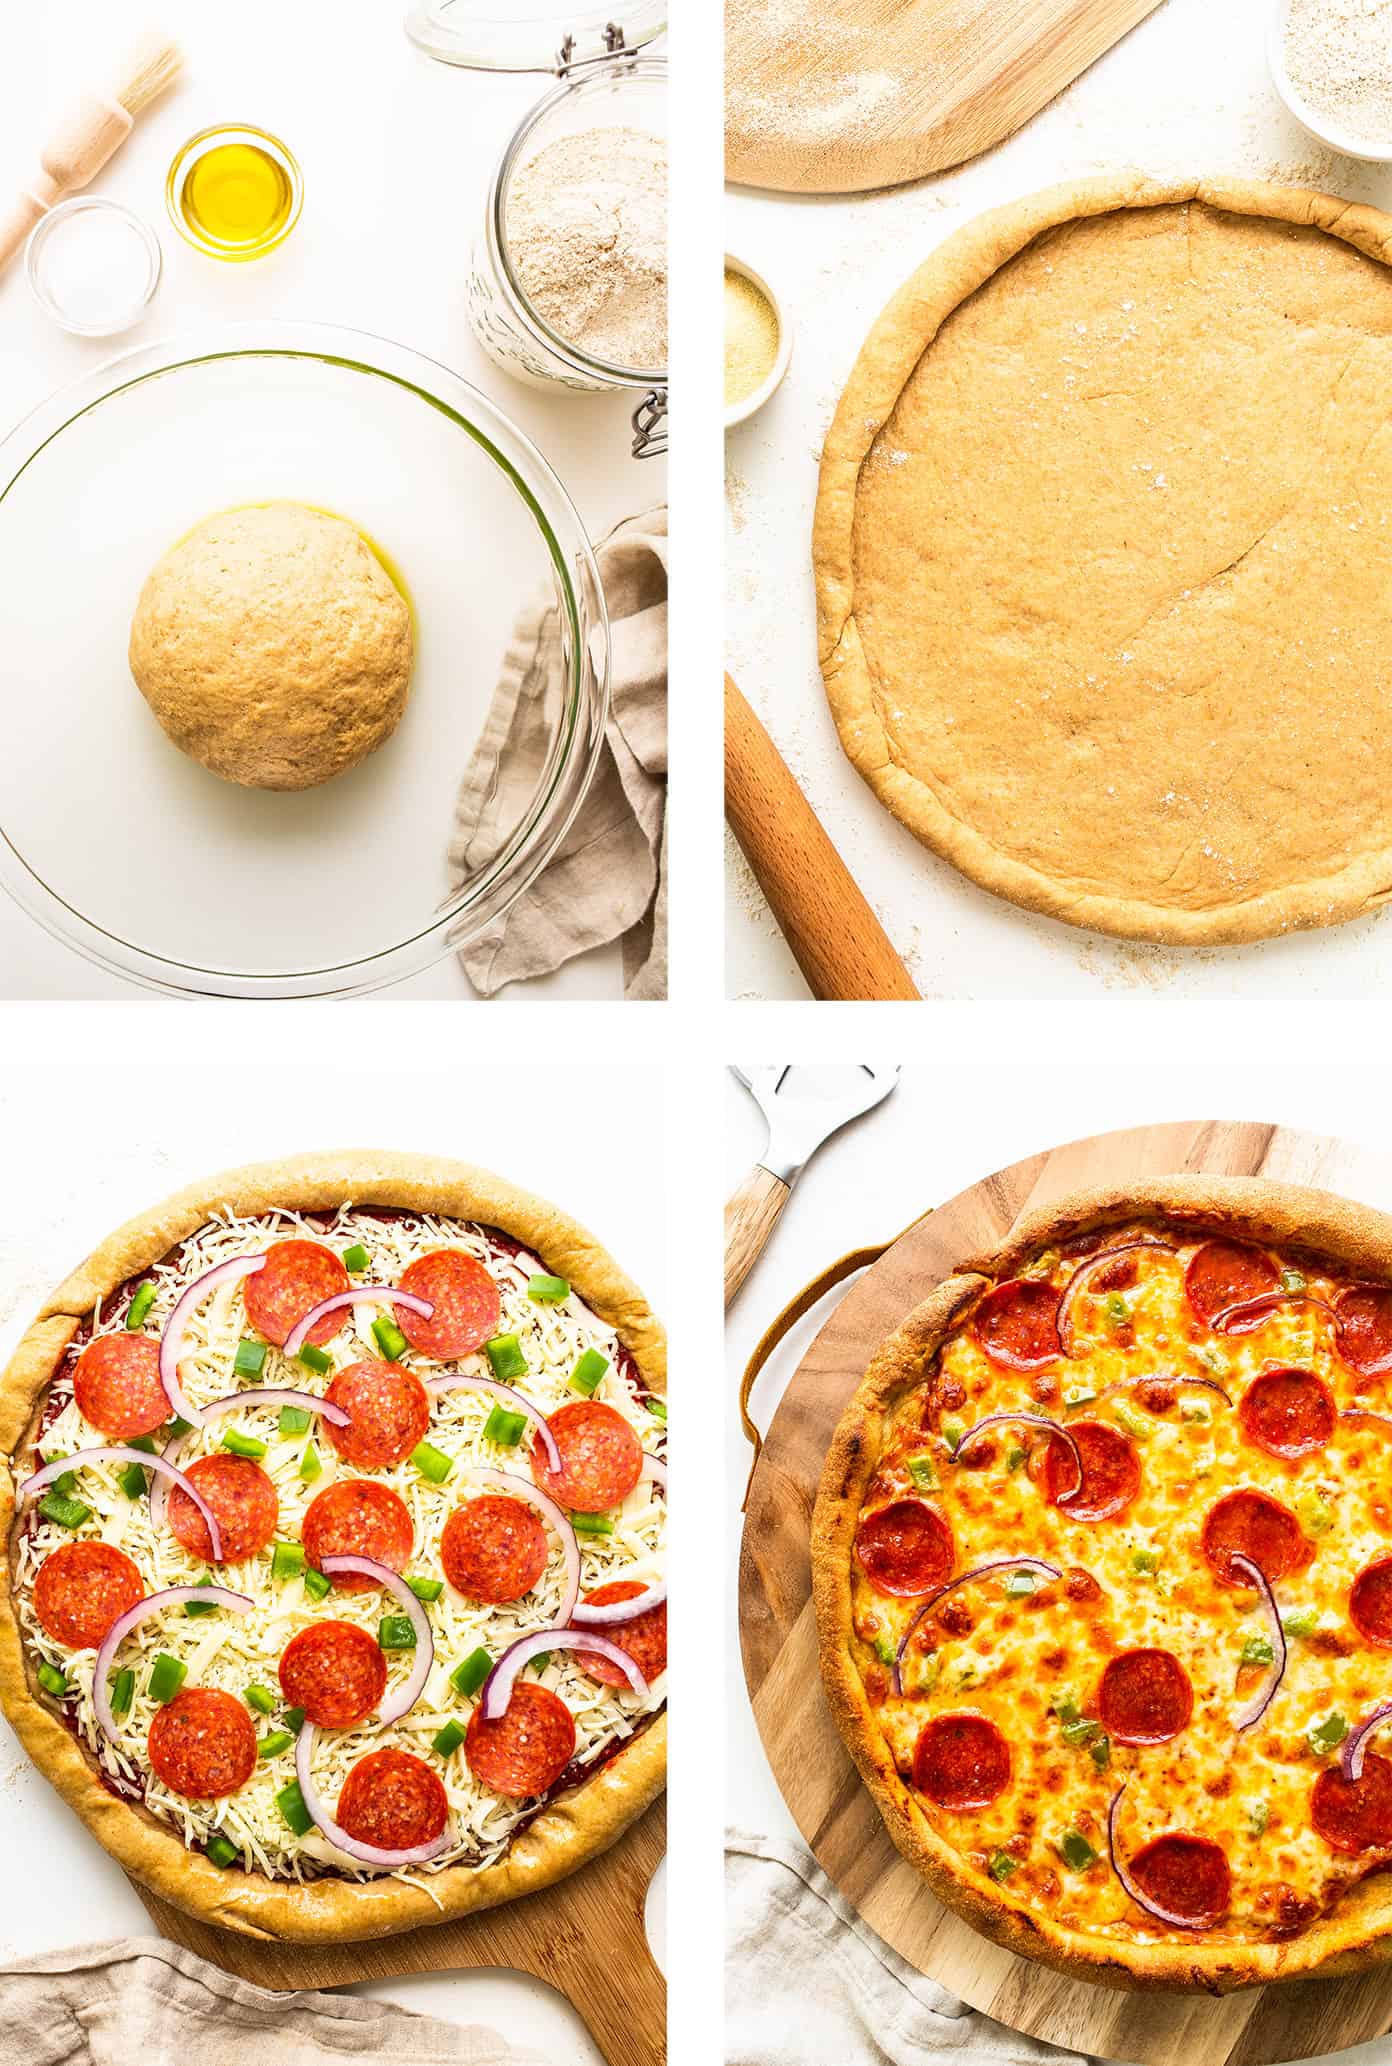 Step by step photos for how to make homemade pizza dough